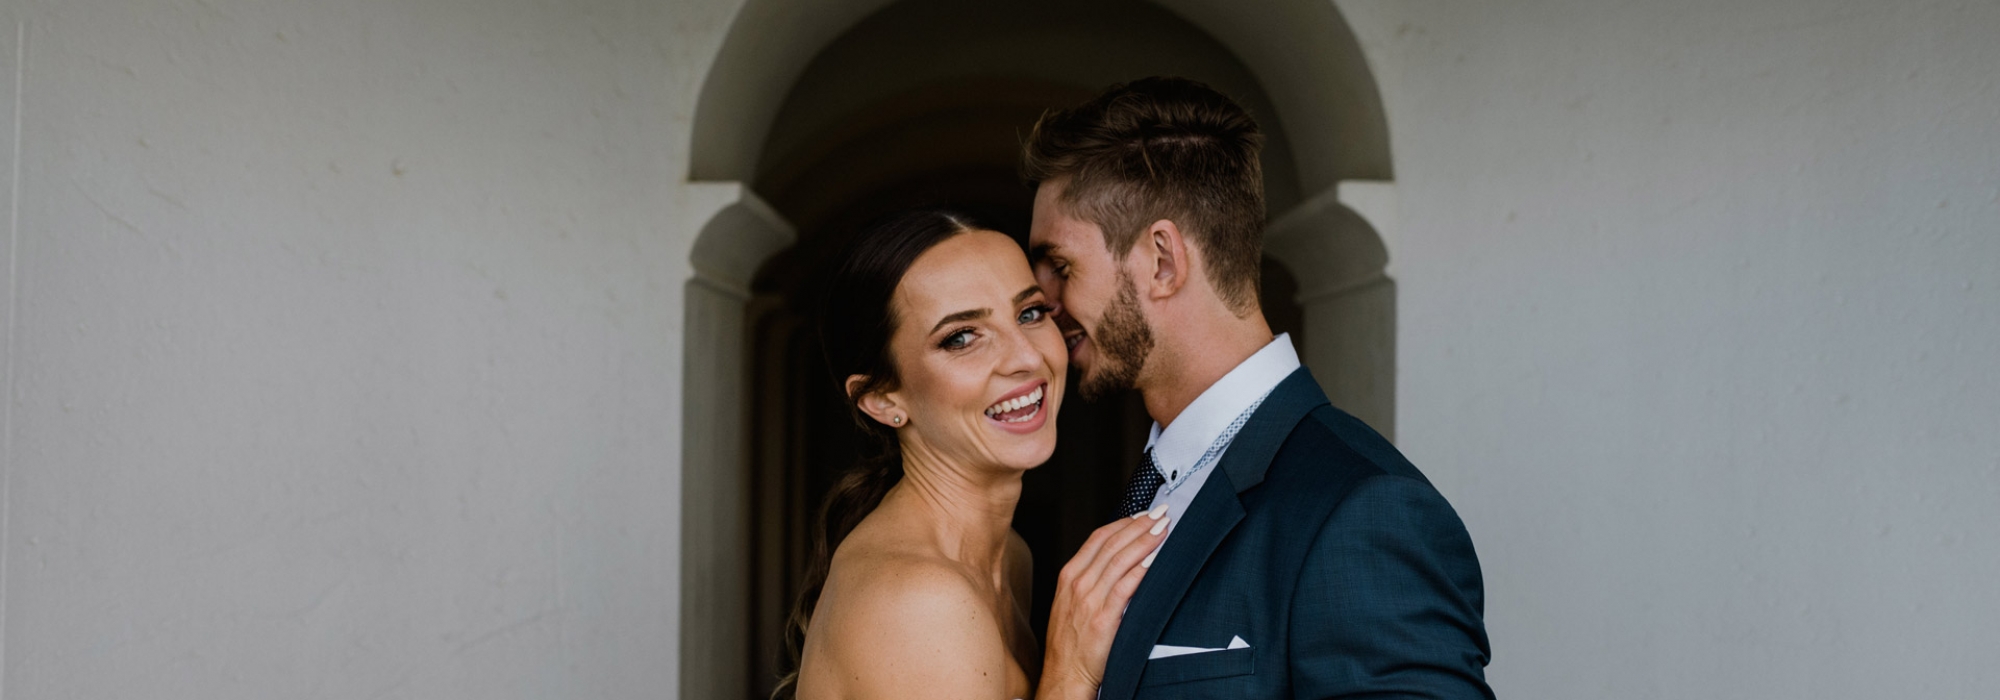 Katemartensphotography–Ash&Holly,Oysterbox_620